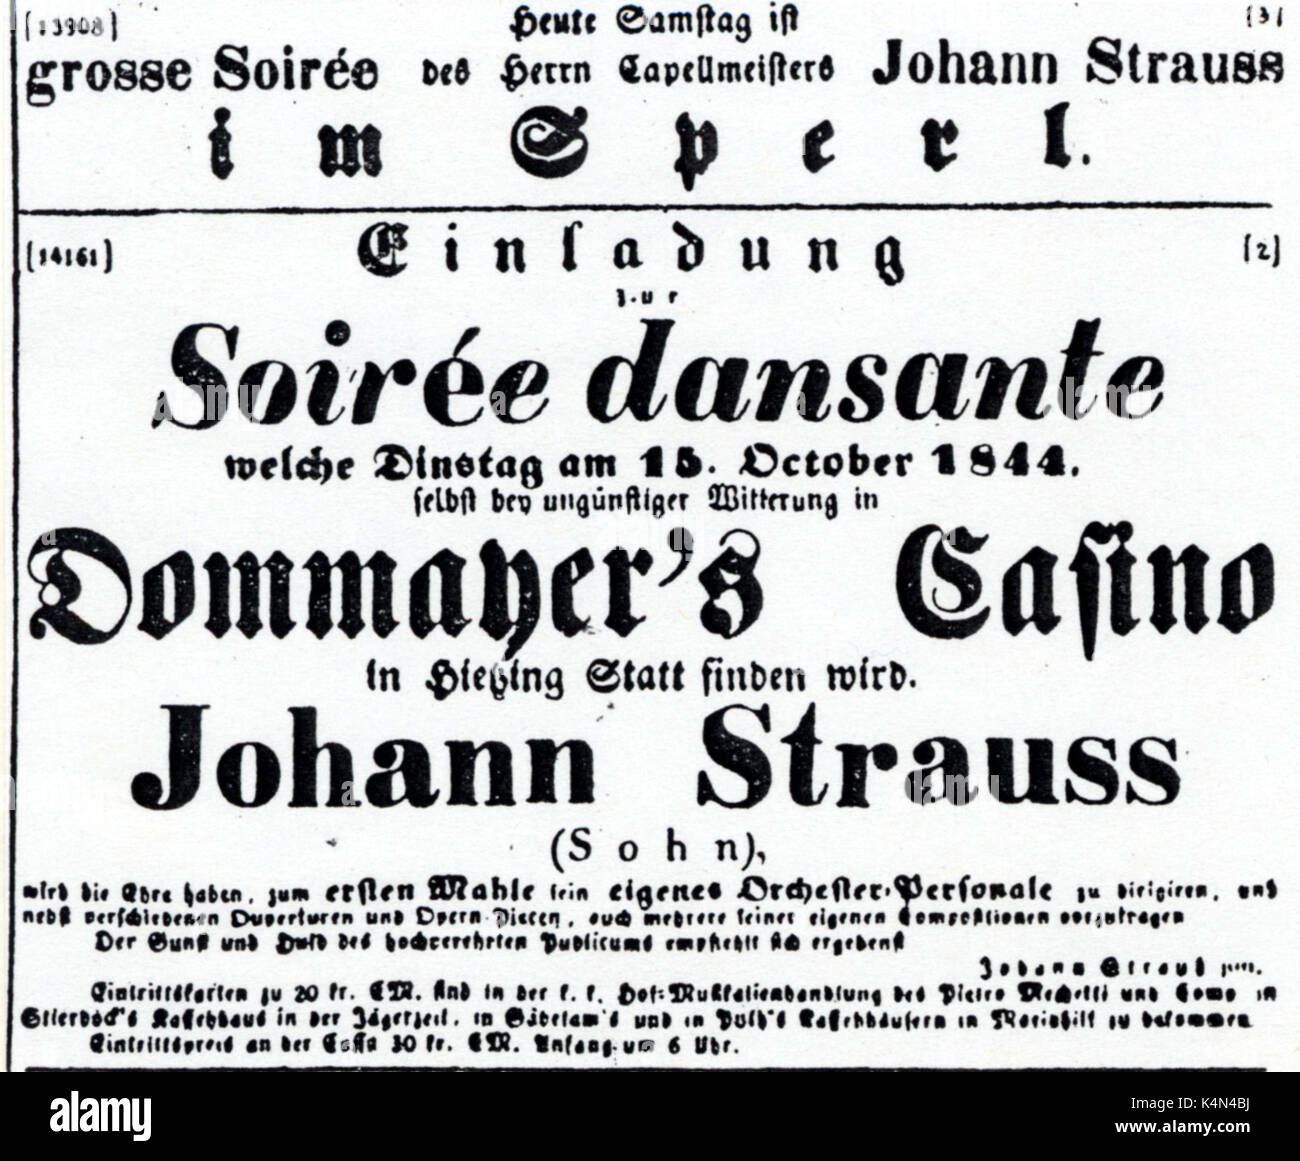 Notice for evening with Johann Strauss from Dommayer's Casino announcing dance evening (soiree dansante) on 15th October 1844. Stock Photo